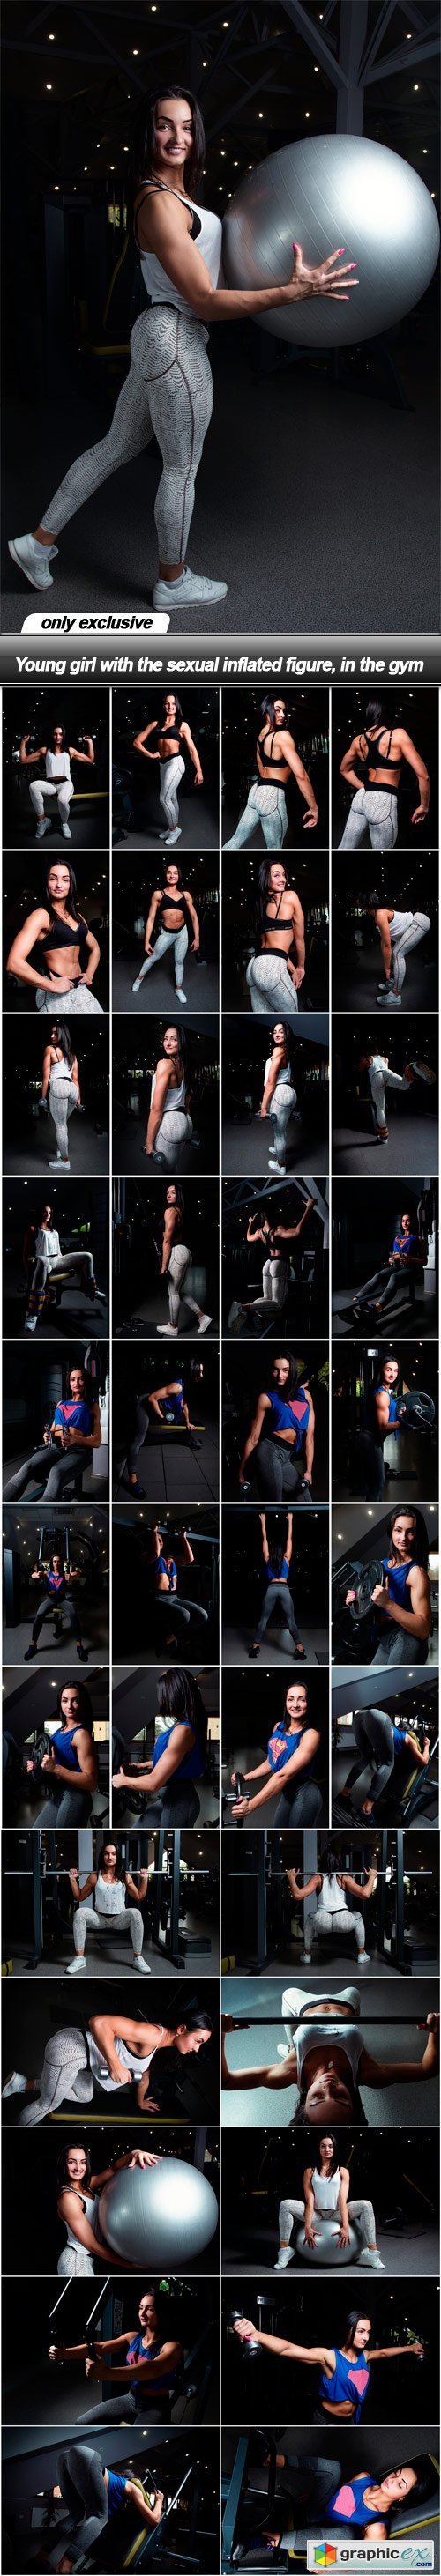 Young girl with the sexual inflated figure, in the gym - 39 UHQ JPEG